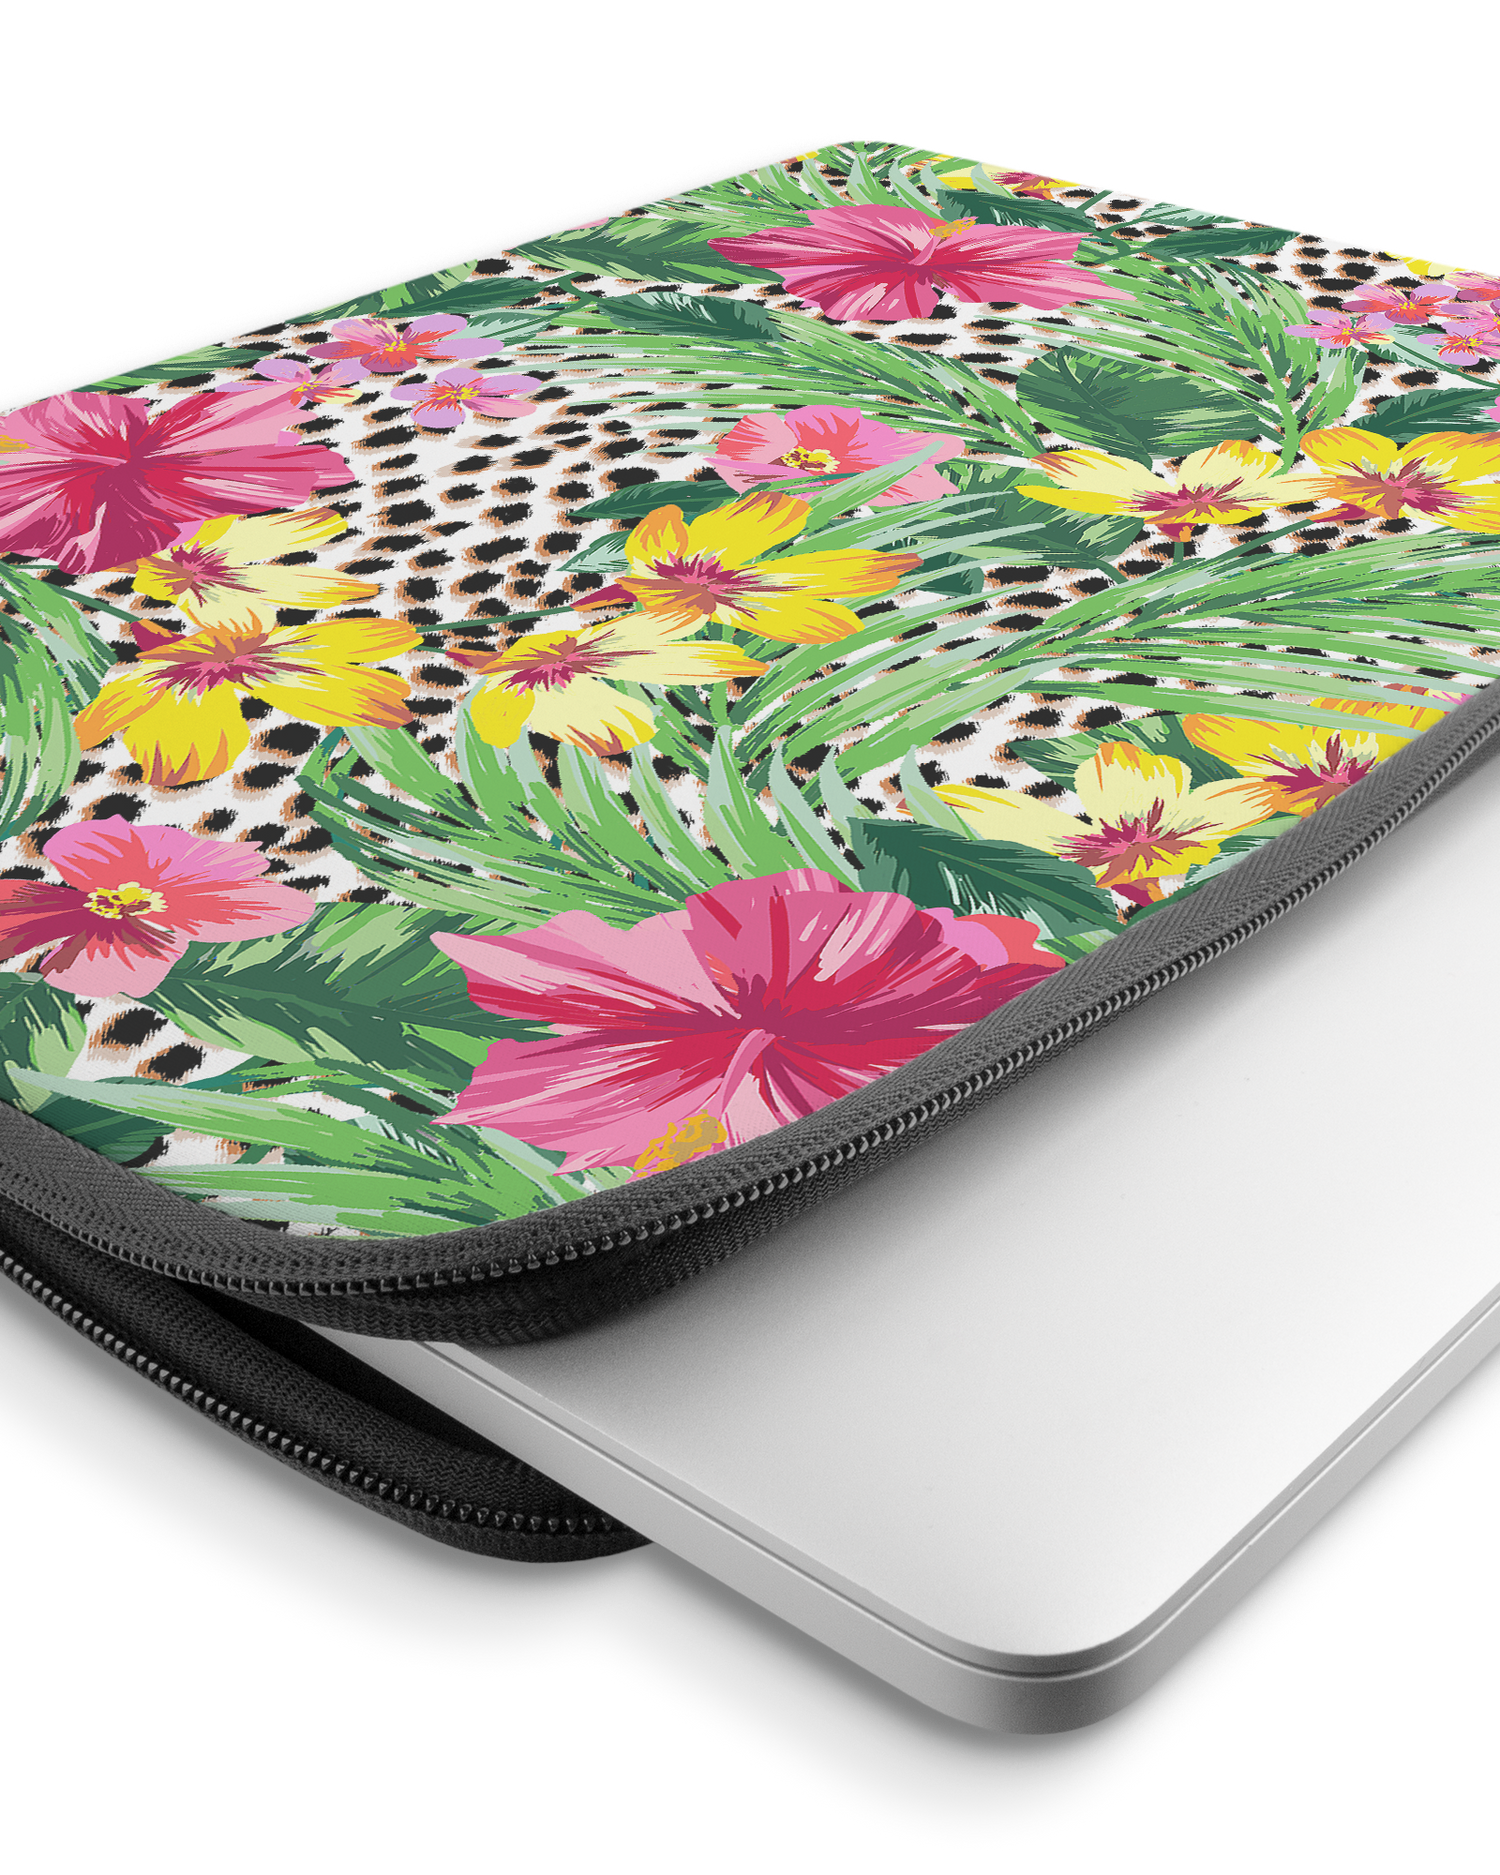 Tropical Cheetah Laptop Case 15-16 inch with device inside